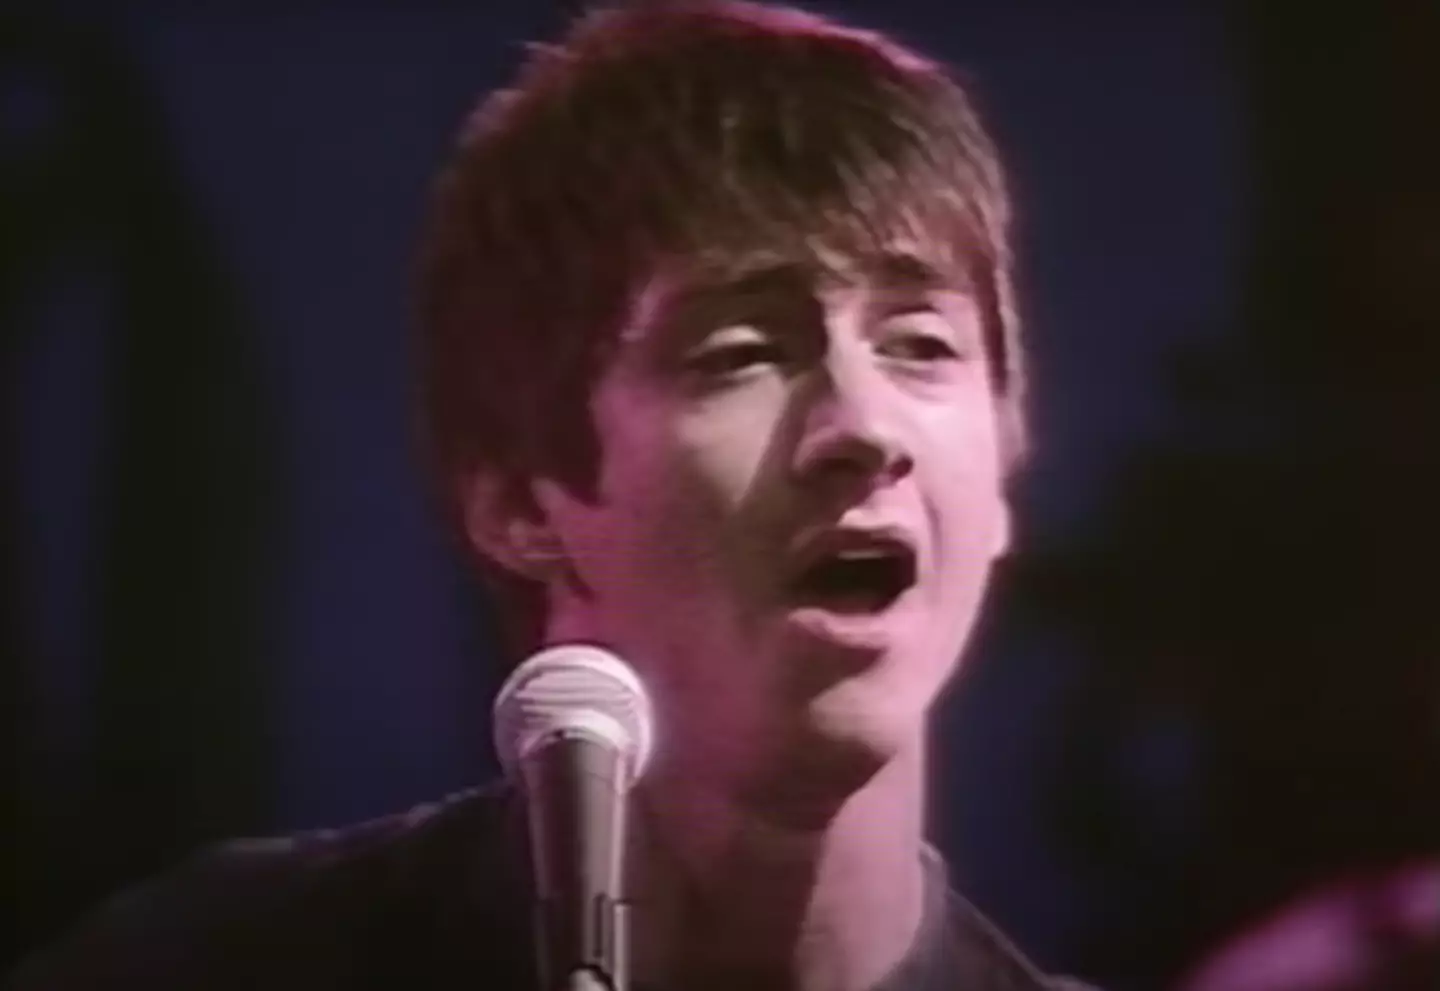 Alex Turner in the music video for 'I Bet You Look Good on the Dancefloor'.